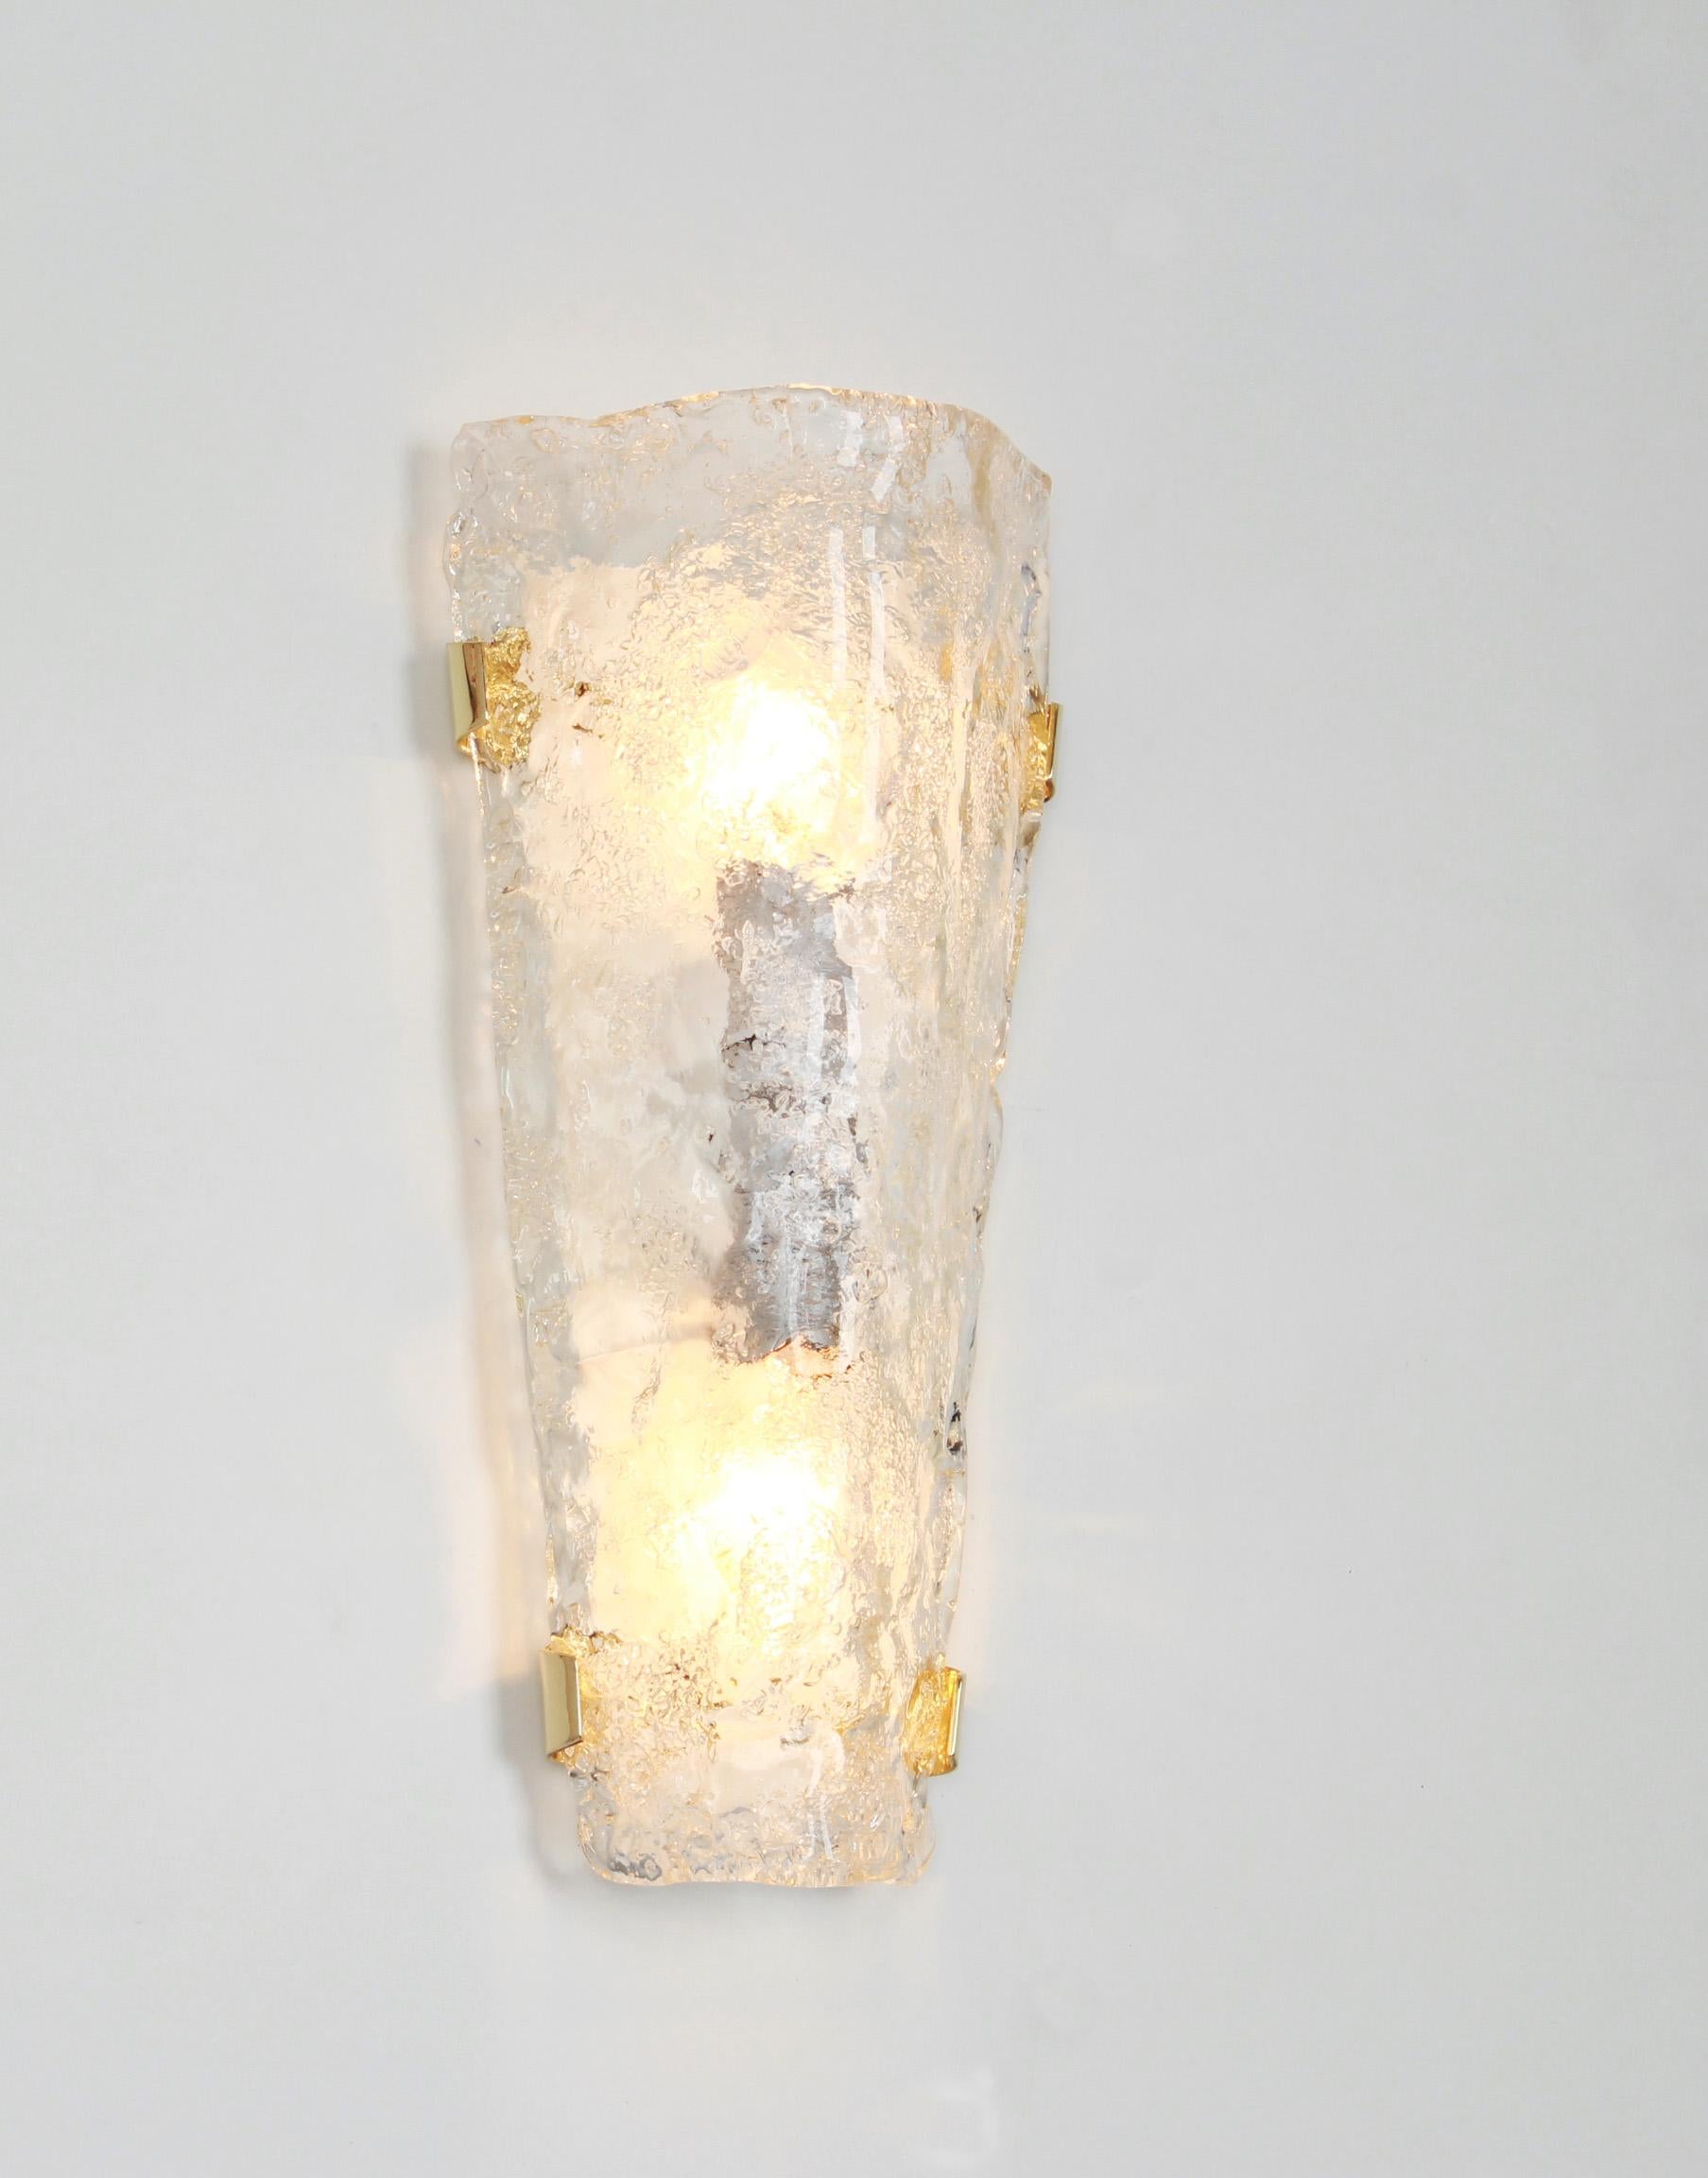 Set of 3 Large Vanity Angular Murano Glass Sconces by Hillebrand, Germany, 1960s For Sale 8